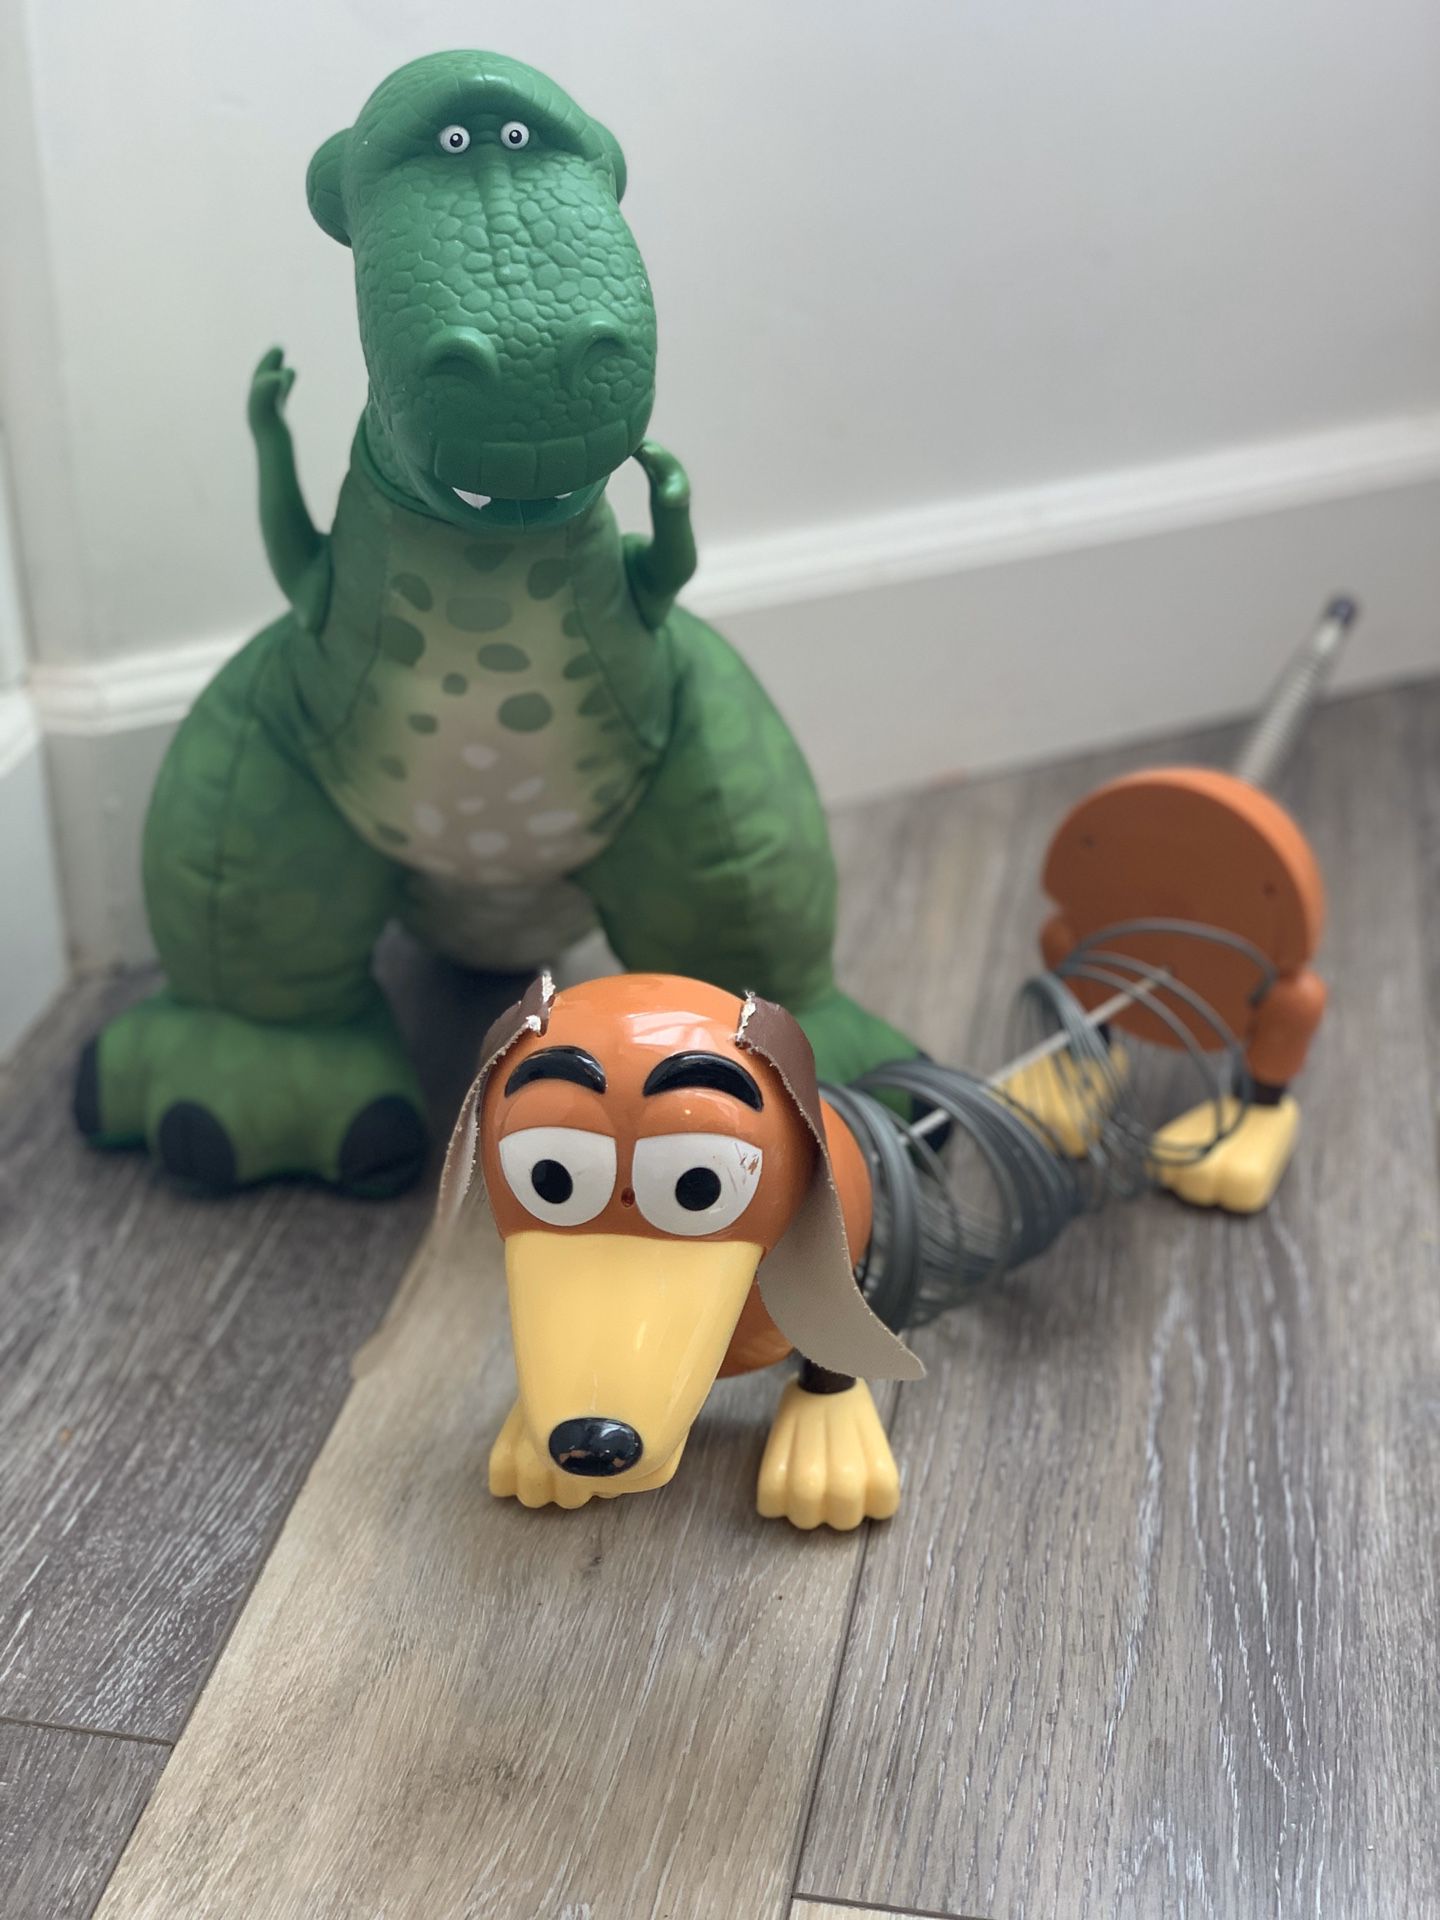 Toy Story Dolls Action Figures - Rex & Slinky